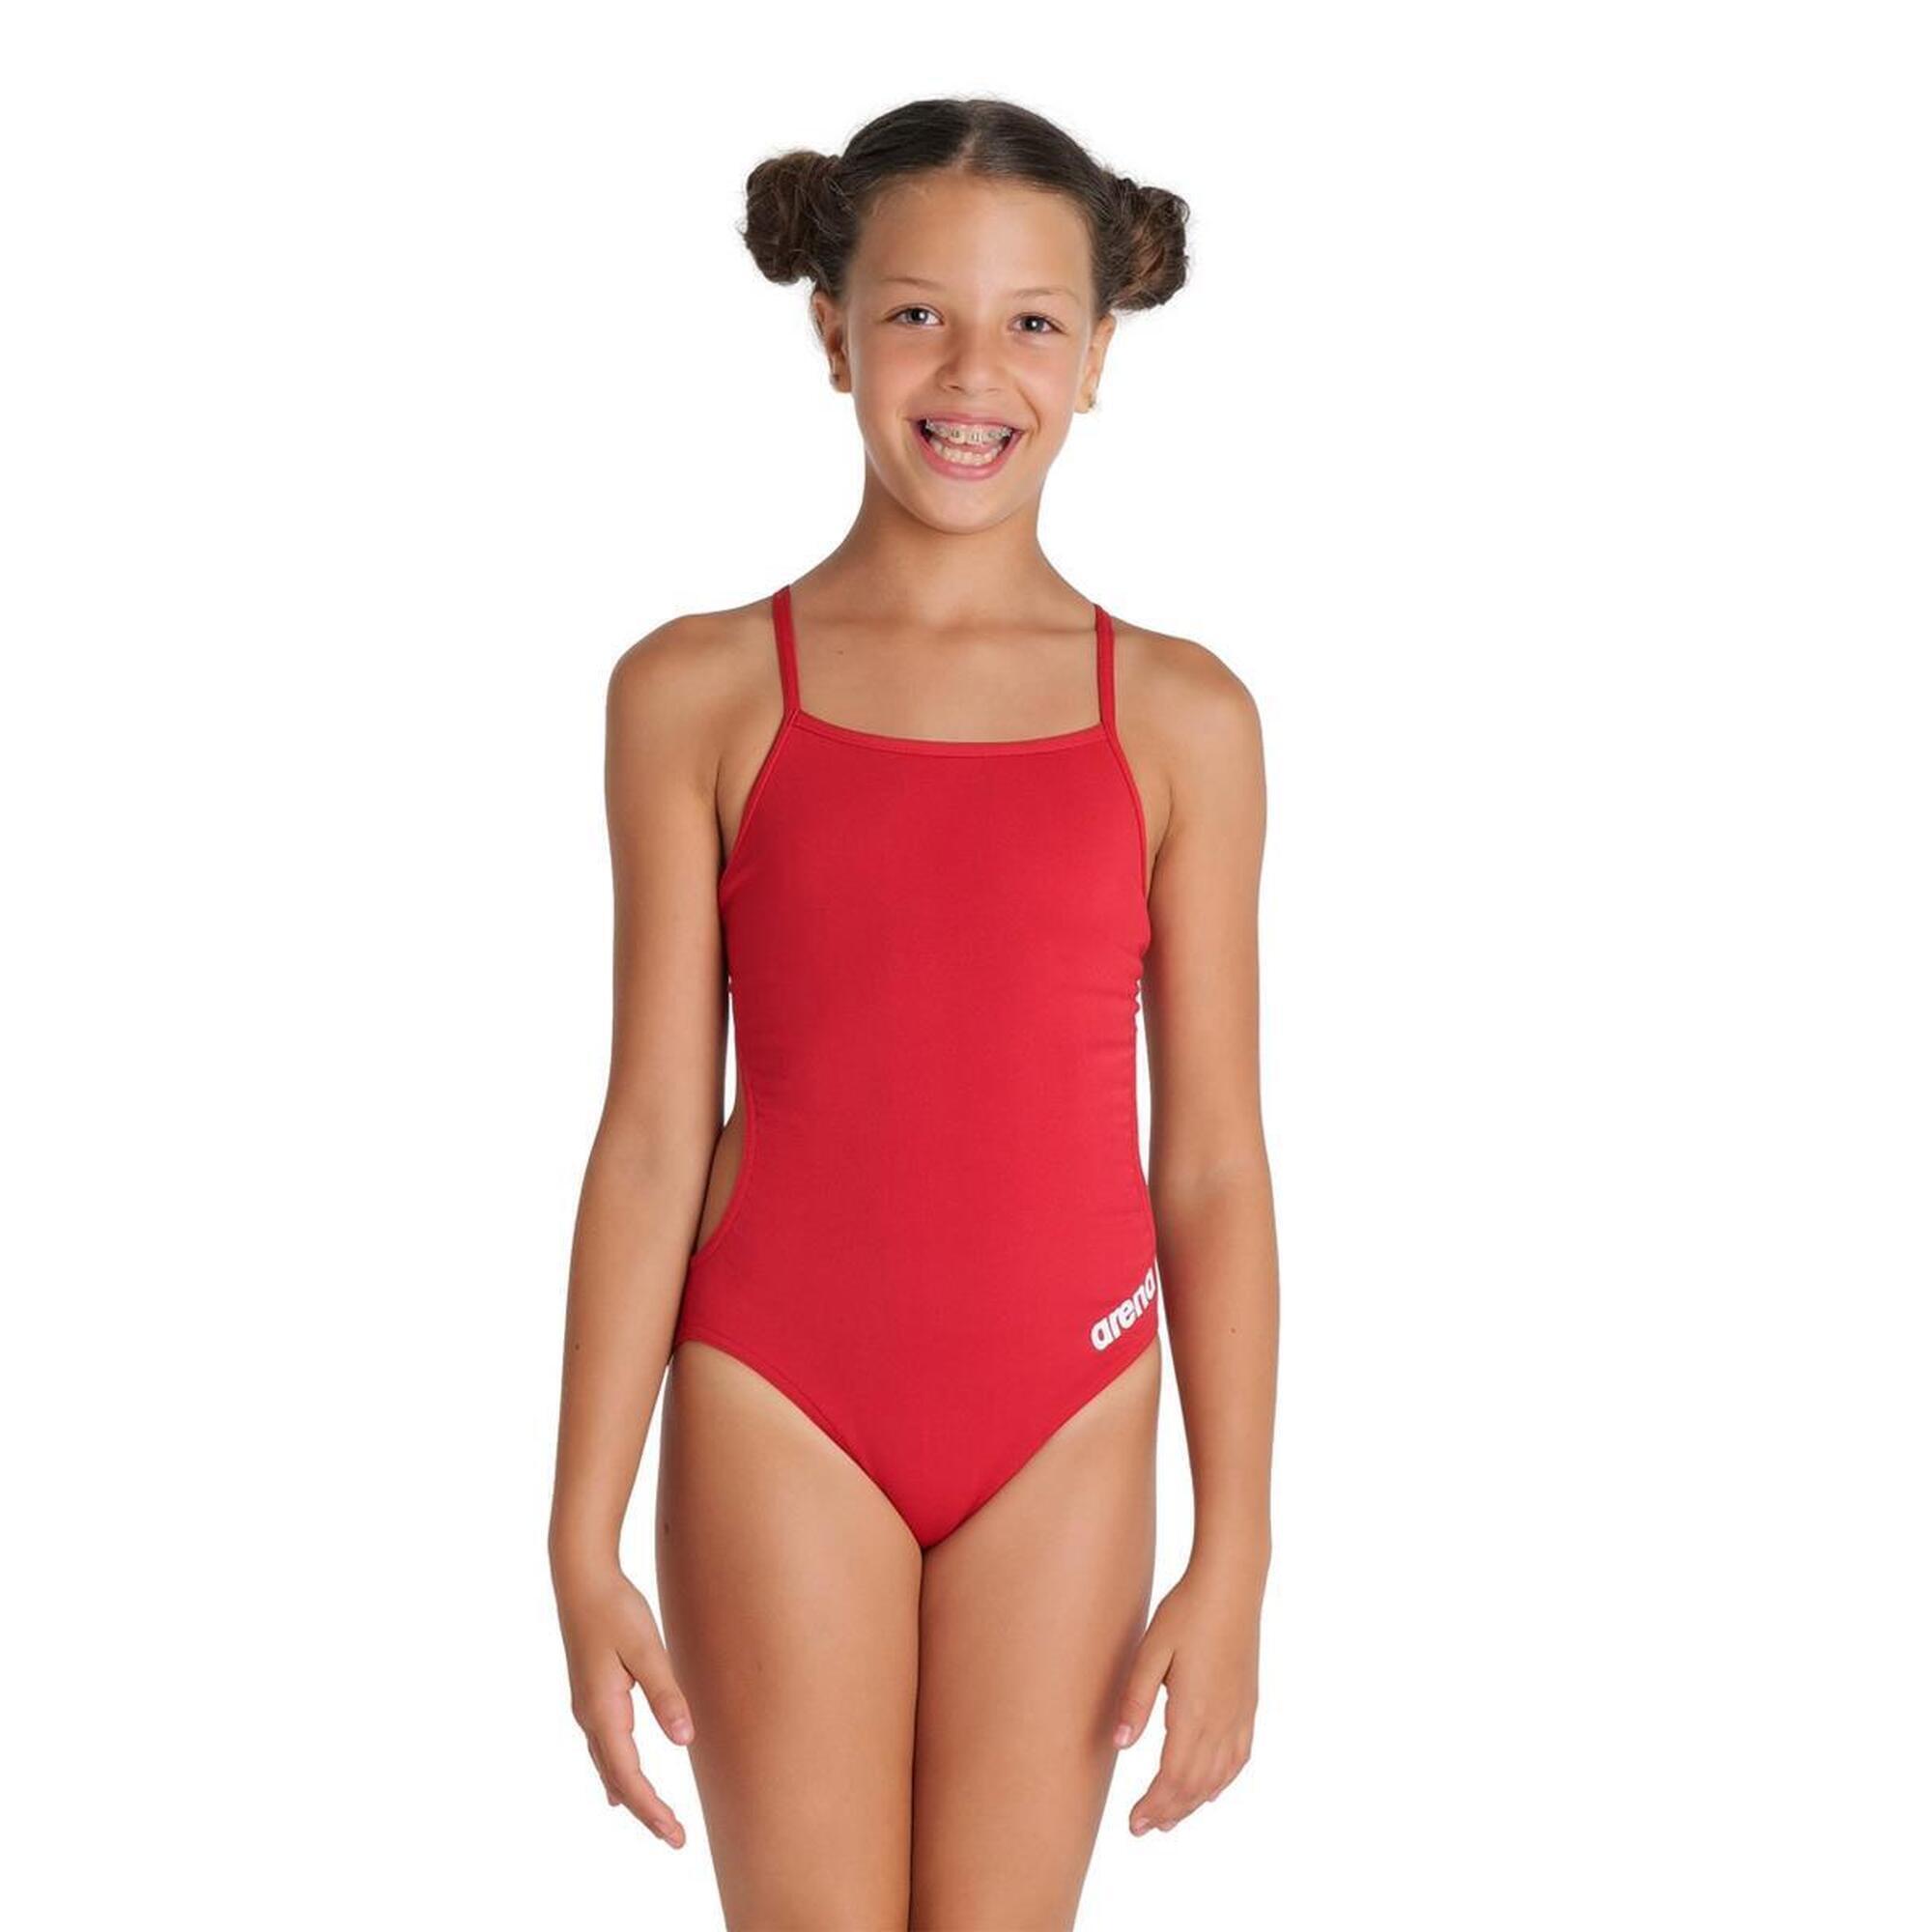 ARENA Arena Girls Team Challenge Solid Swimsuit - Red/White